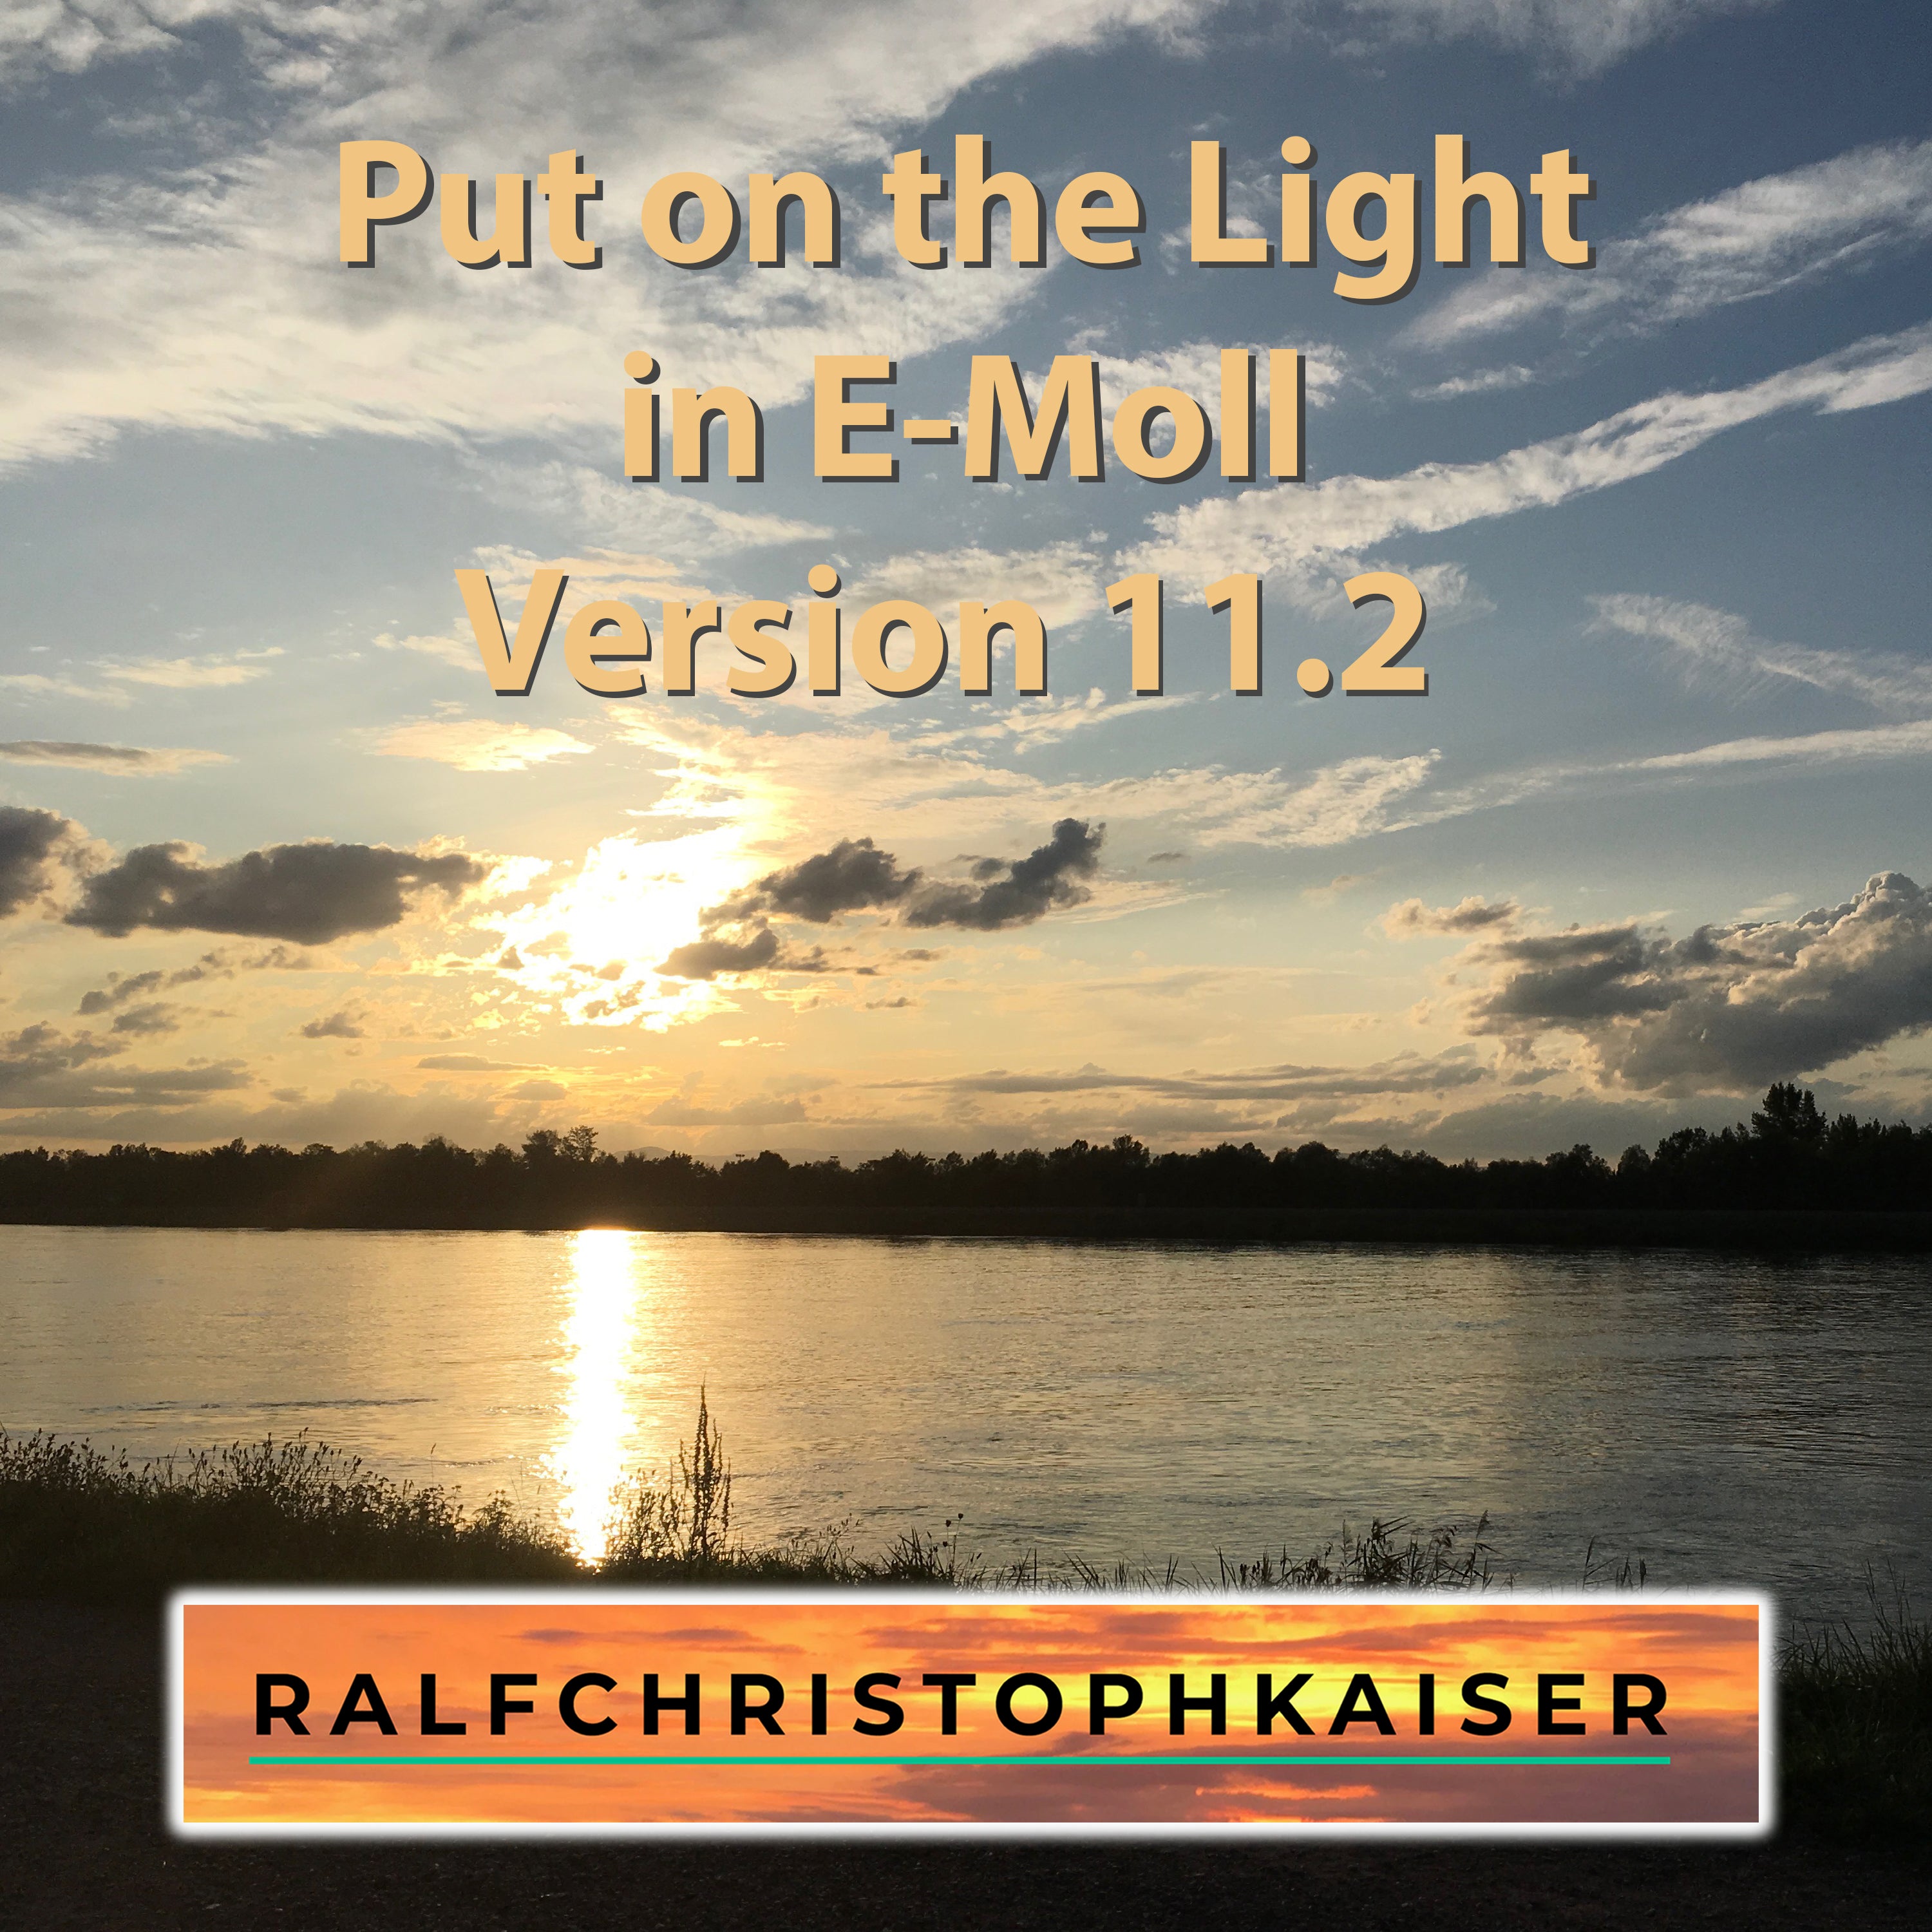 Put on the Light in classical version 11.2 with full orchestra in E-minor by Ralf Christoph Kaiser HD Sound wav file download - ralfchristophkaiser.com Musik und Noten